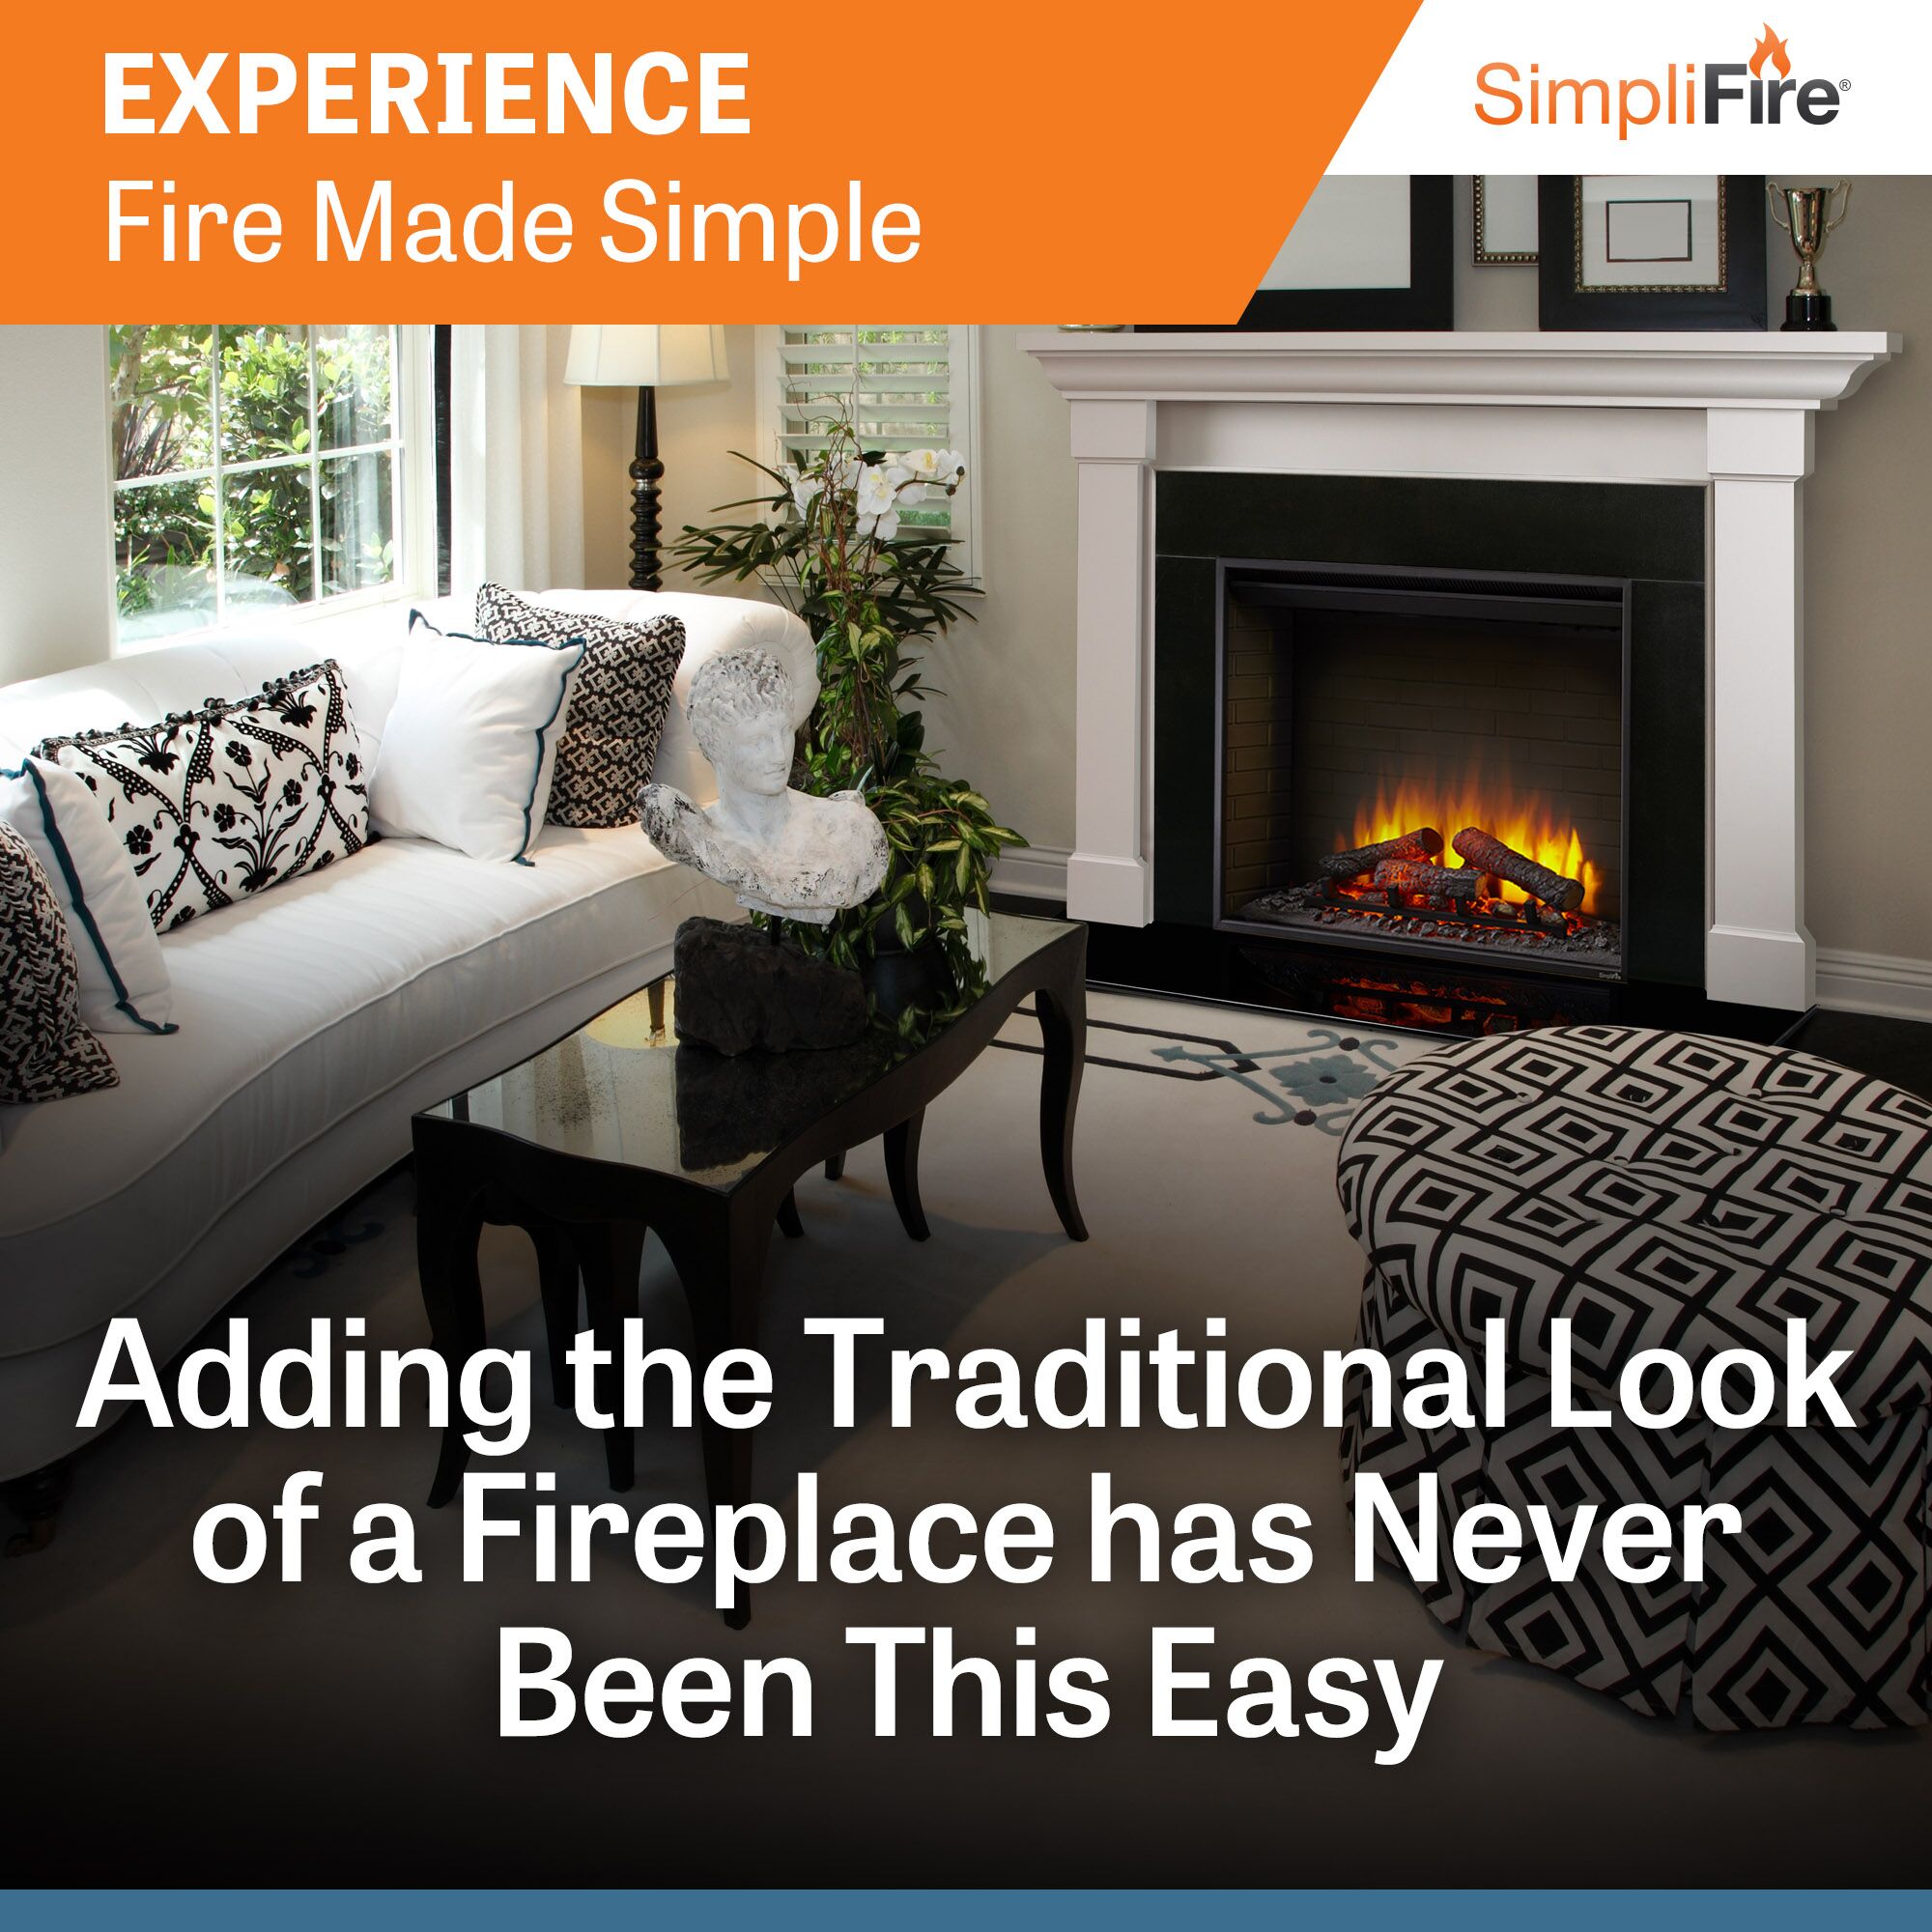 30 inch built-in electric fireplace thumbnail image